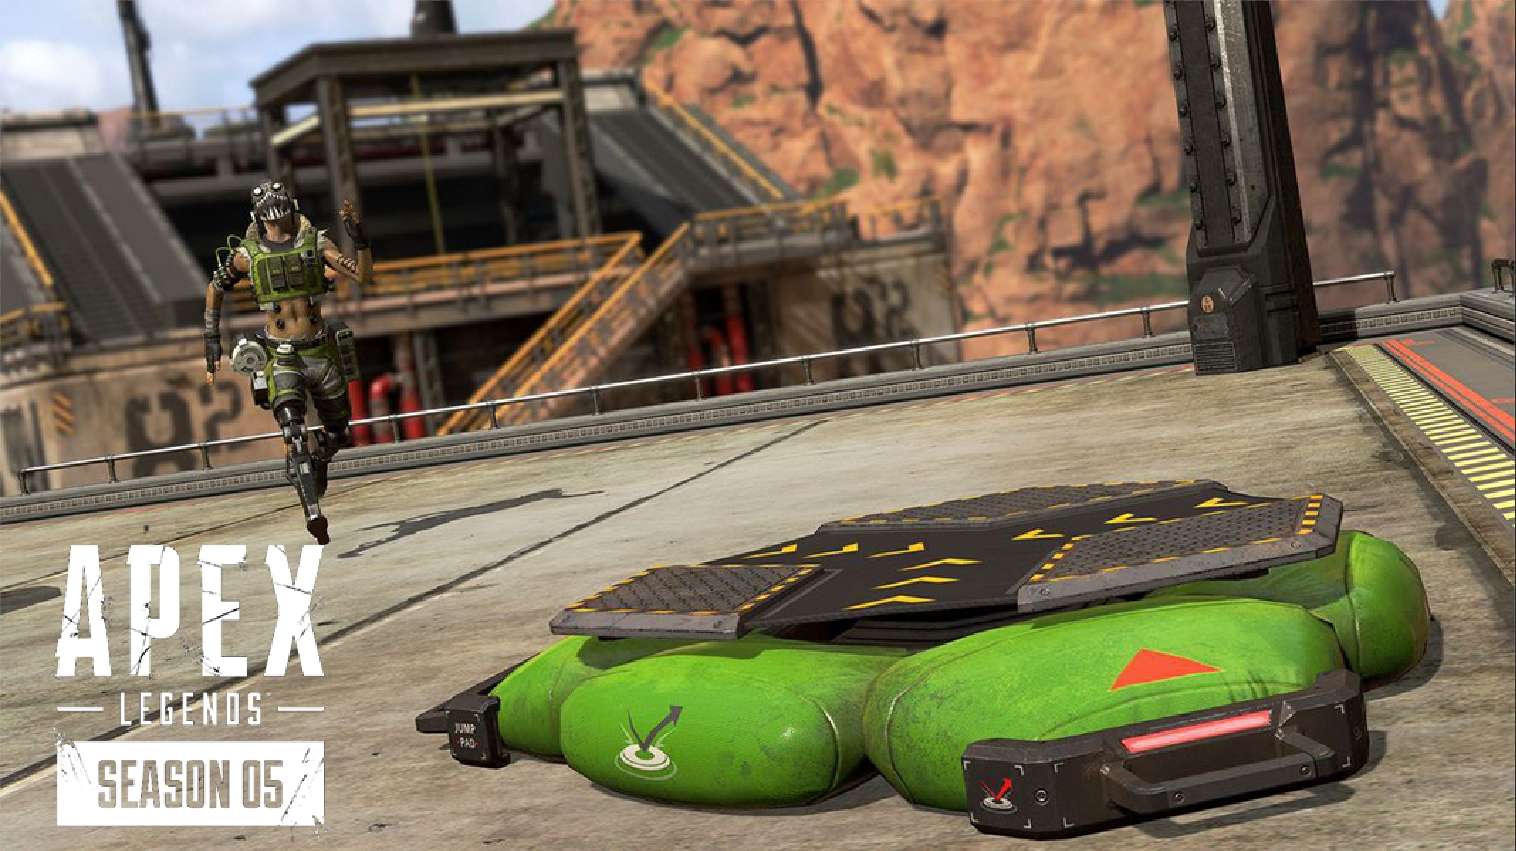 Apex Legends launch pad and octane